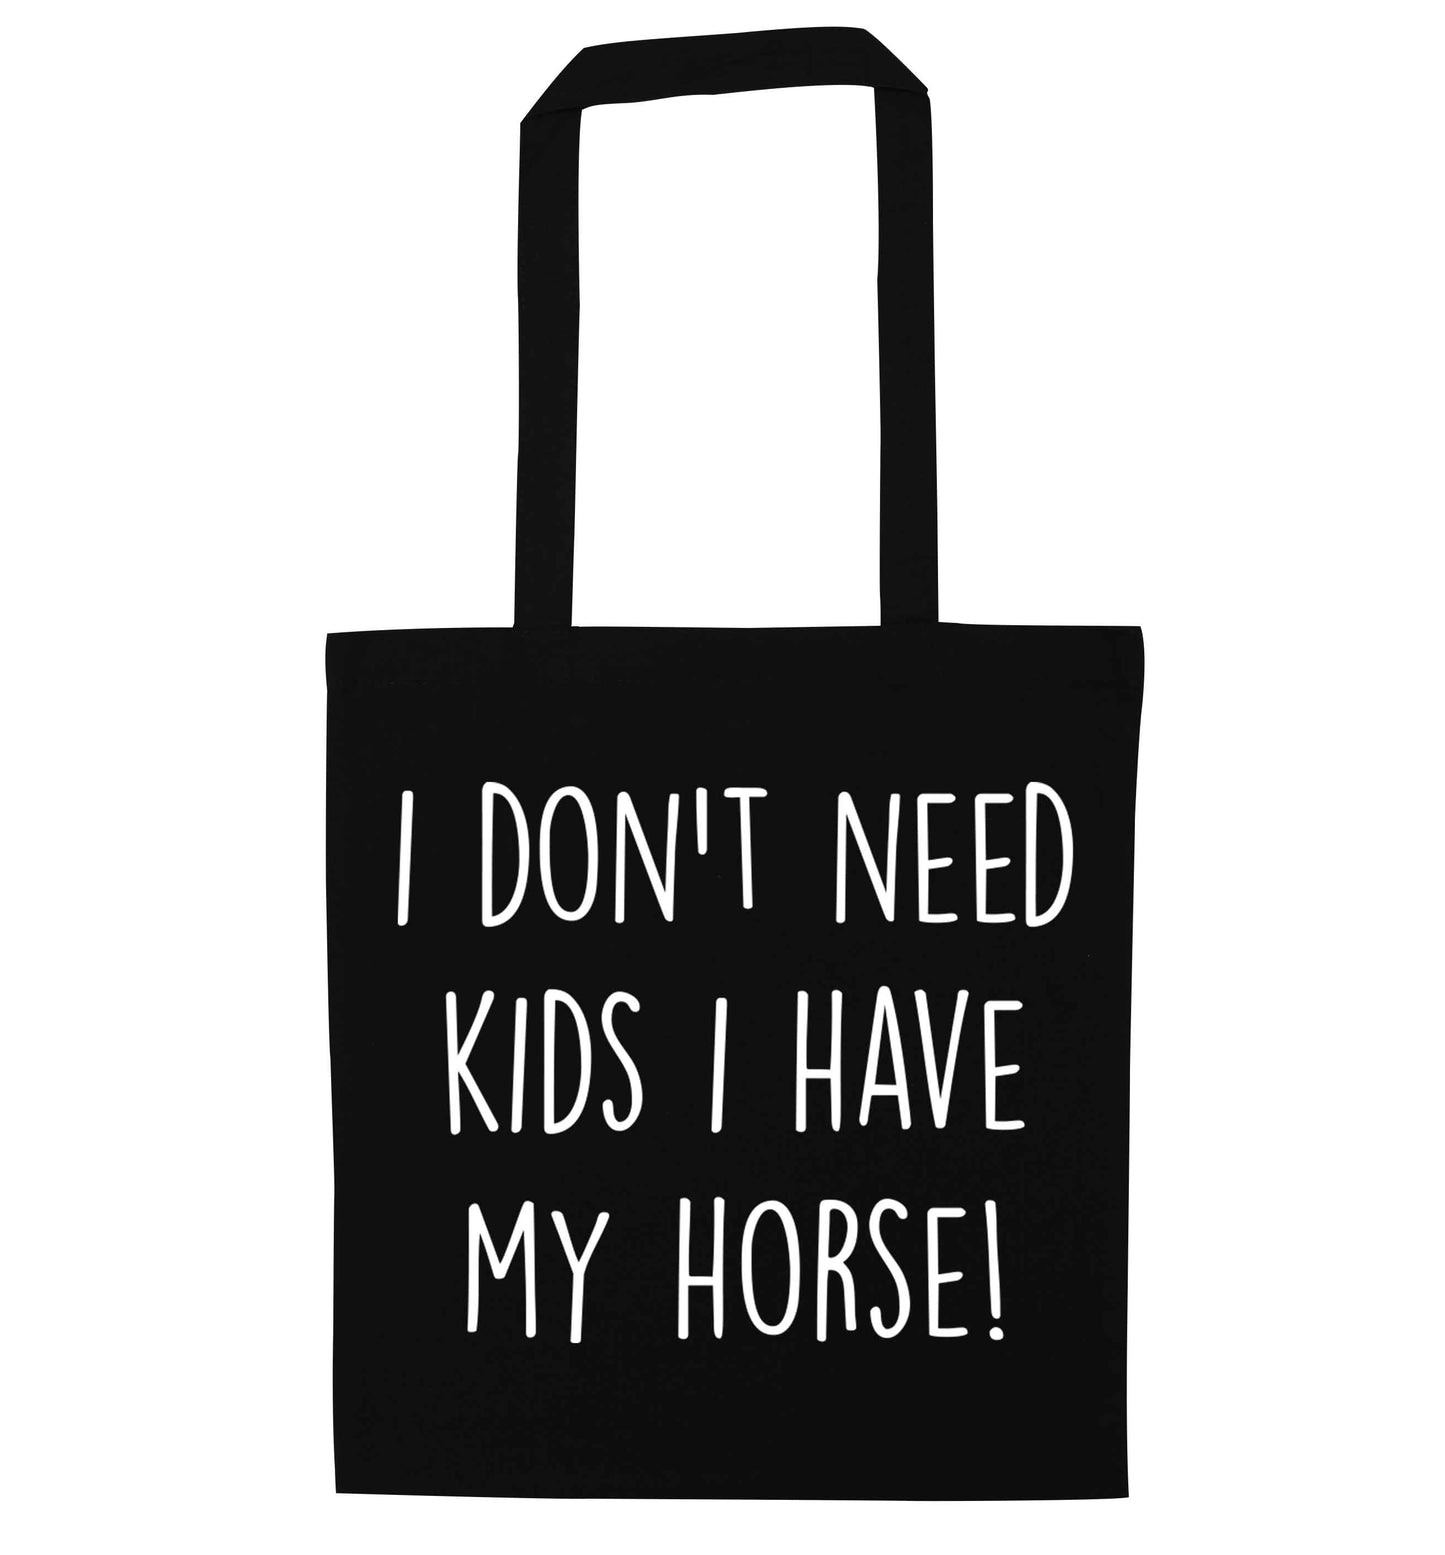 I don't need kids I have my horse black tote bag